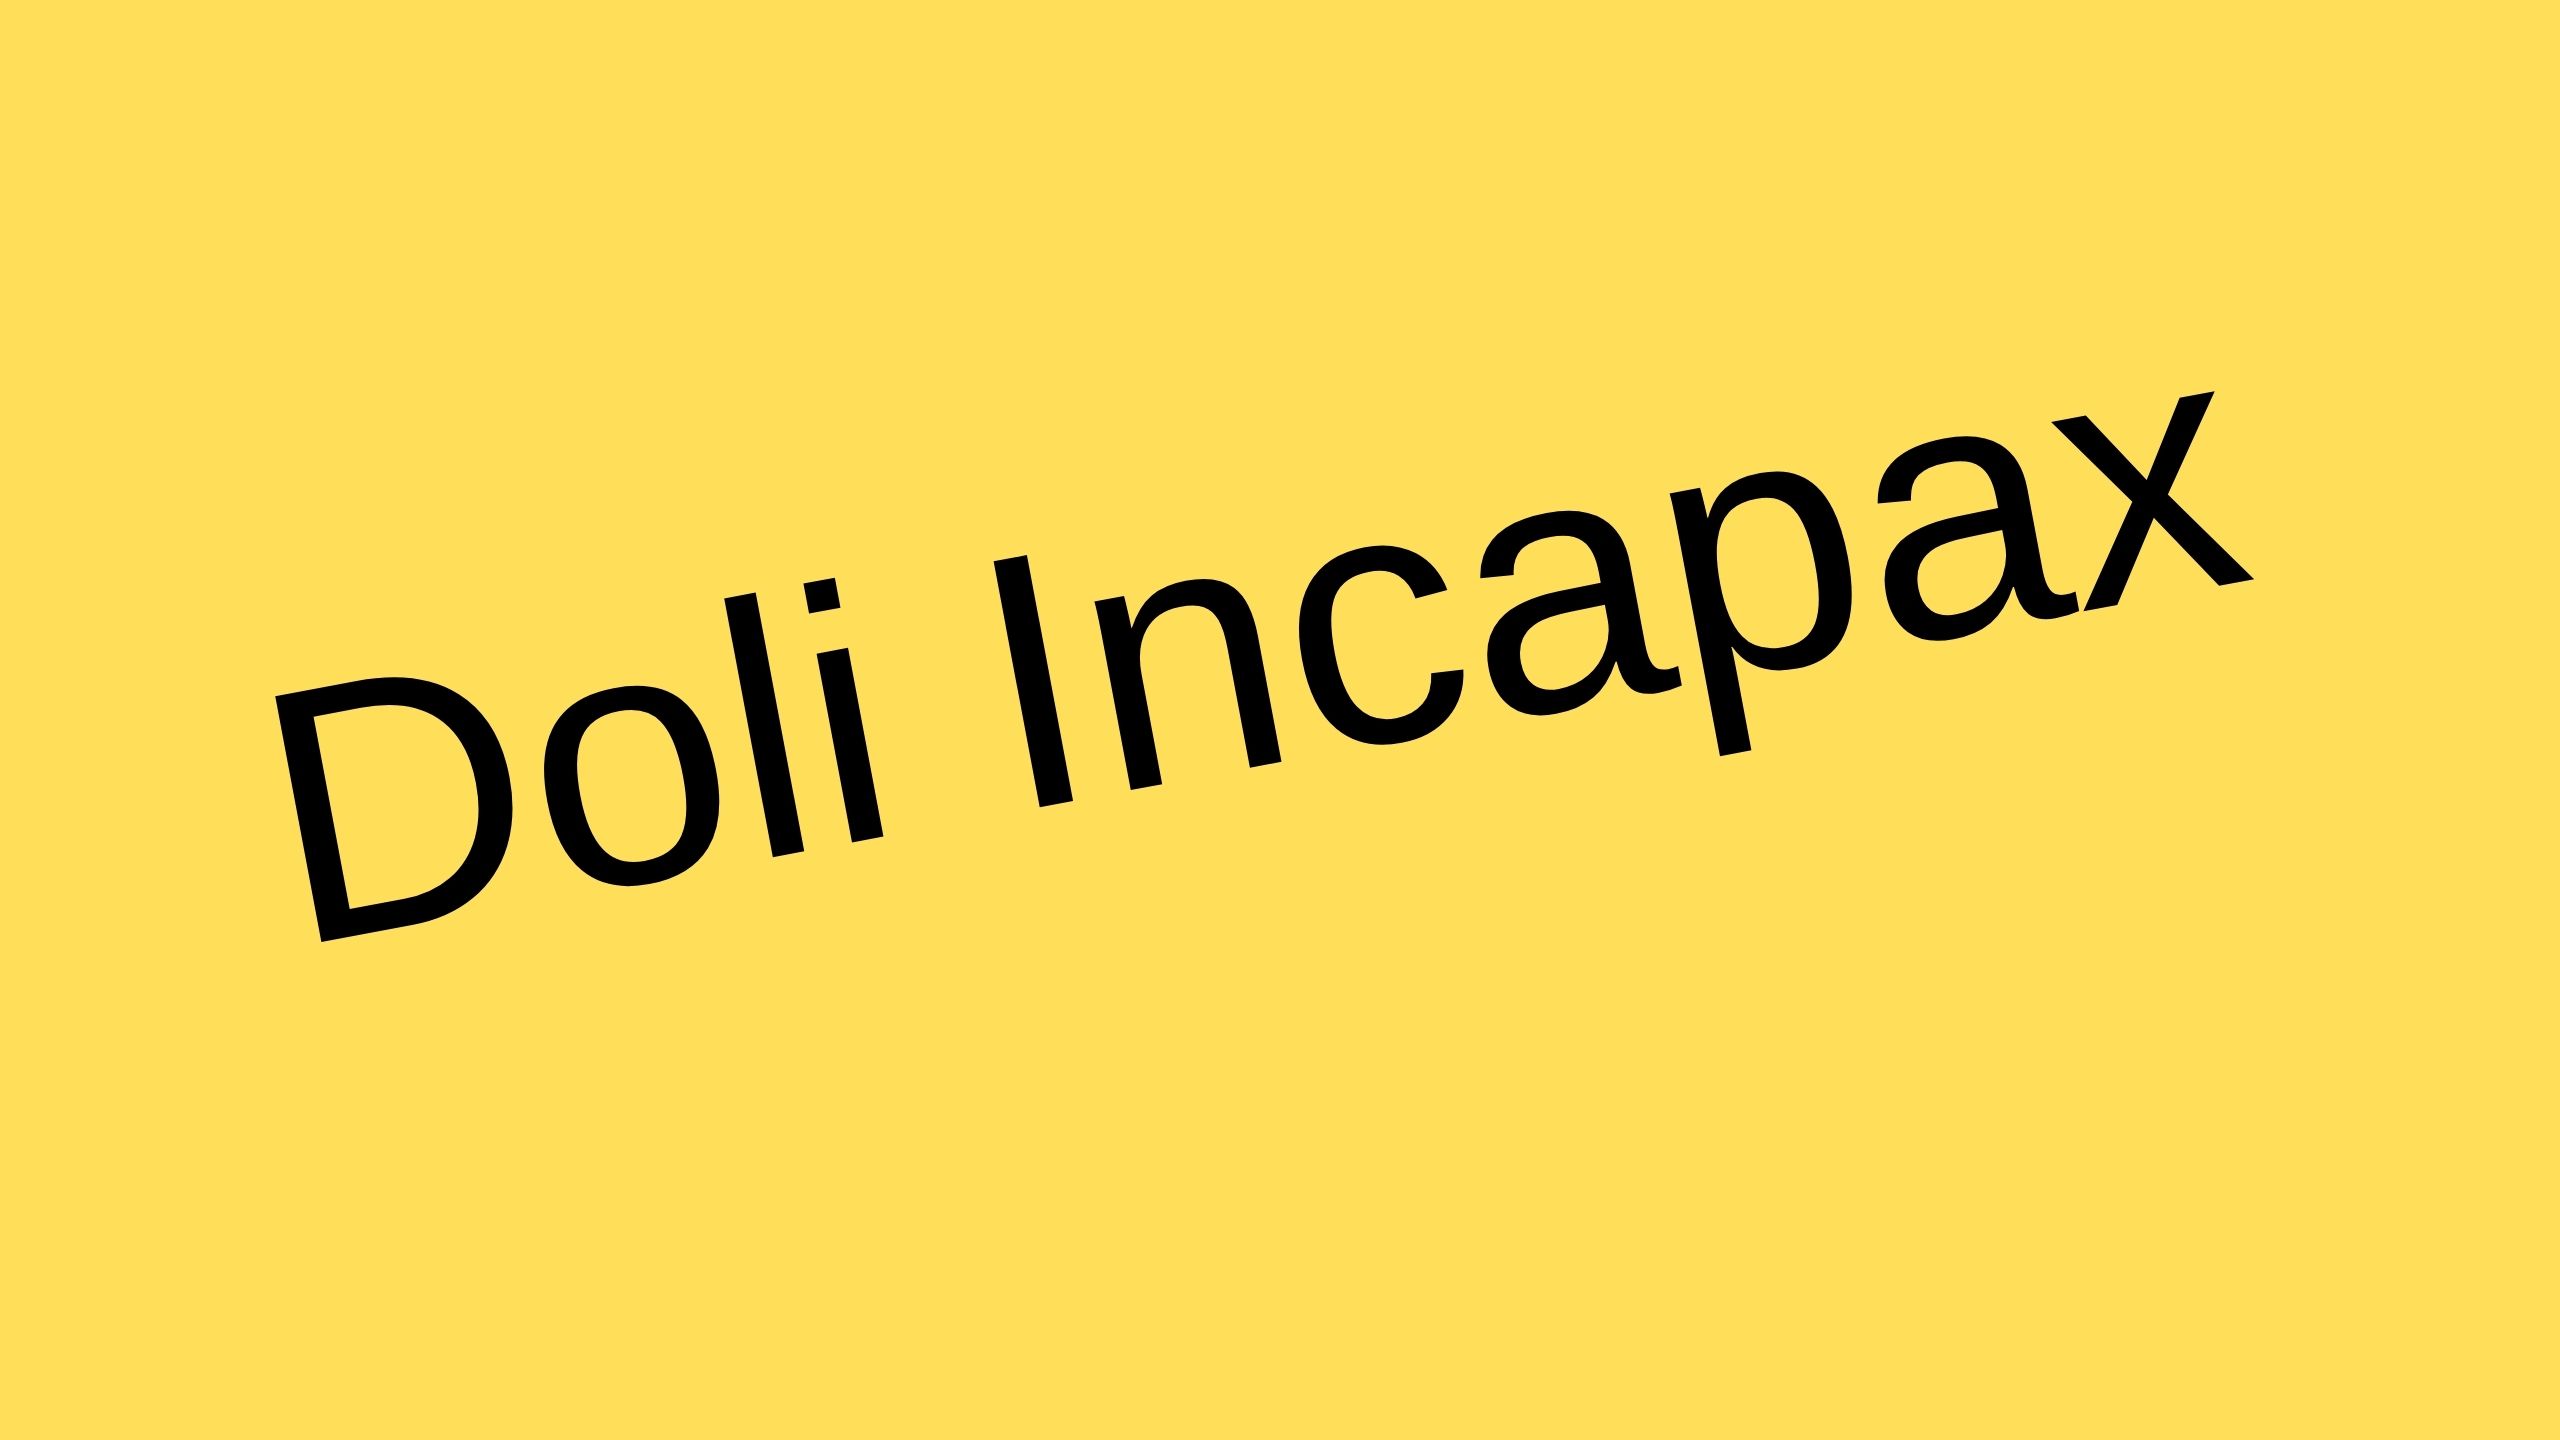 What is the applicability of doli incapax in IPC